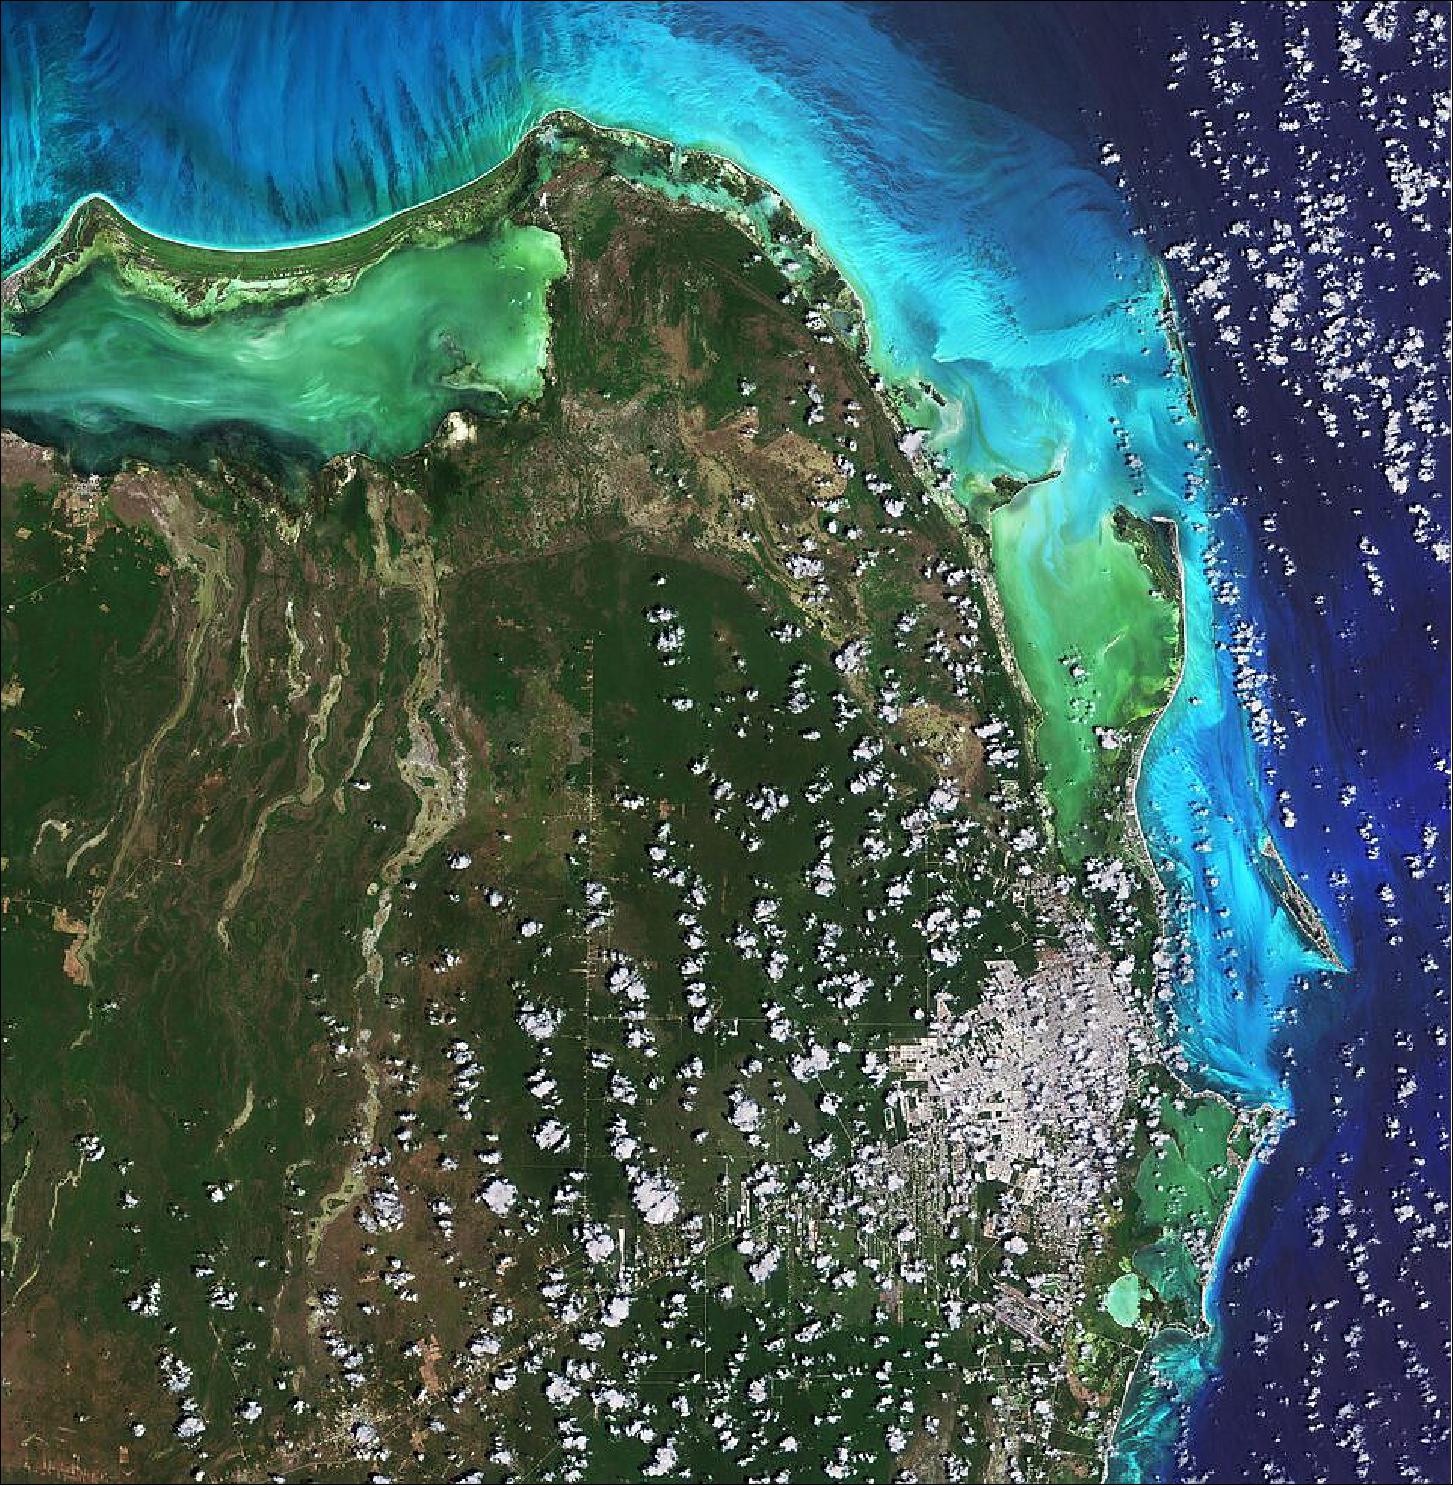 Figure 9: This image of Cancún on the Caribbean Sea was captured on 16 April 2021 by the Sentinel-2 mission. The color of the water in the image varies from emerald green to turquoise owing to the changing water depths along the coast, turbidity and differences on the ocean floor – from sand to seaweed to rocky areas. The image is also featured on the Earth from Space video program (image credit: ESA)